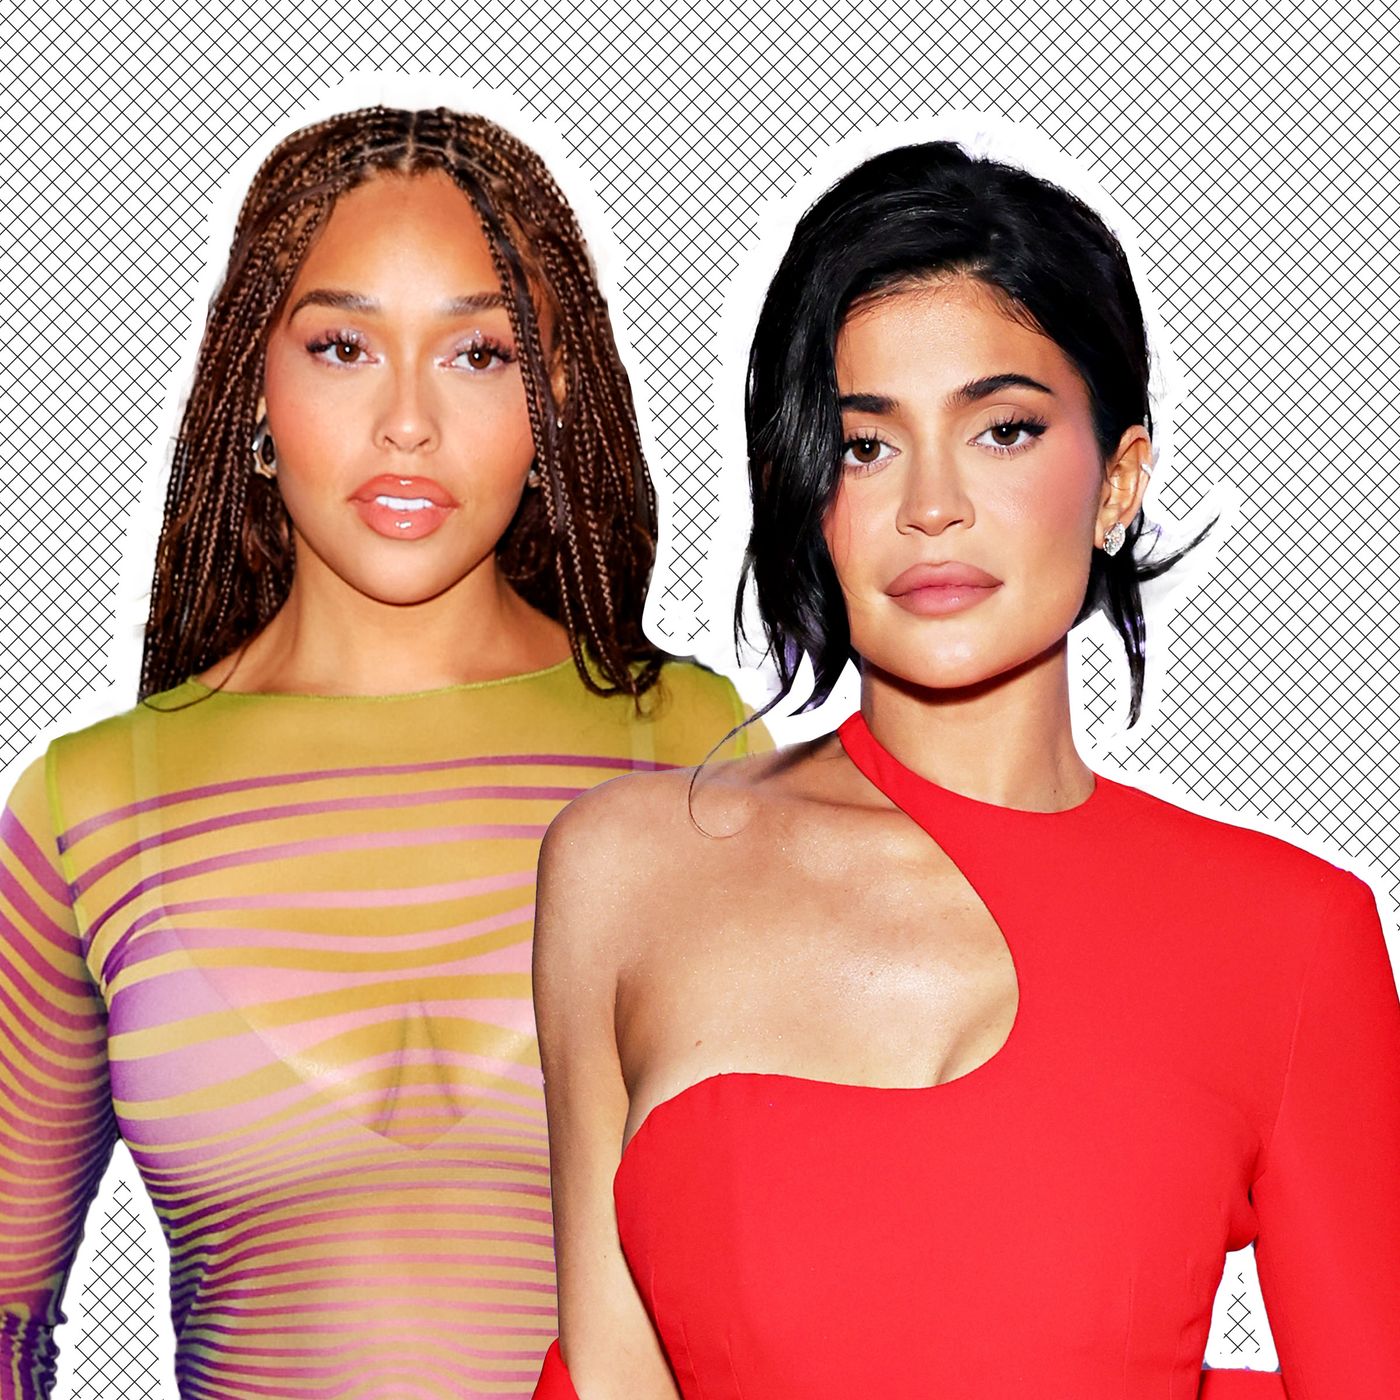 Kylie Jenner's BFF Jordyn Woods Got Real About How Kylie's